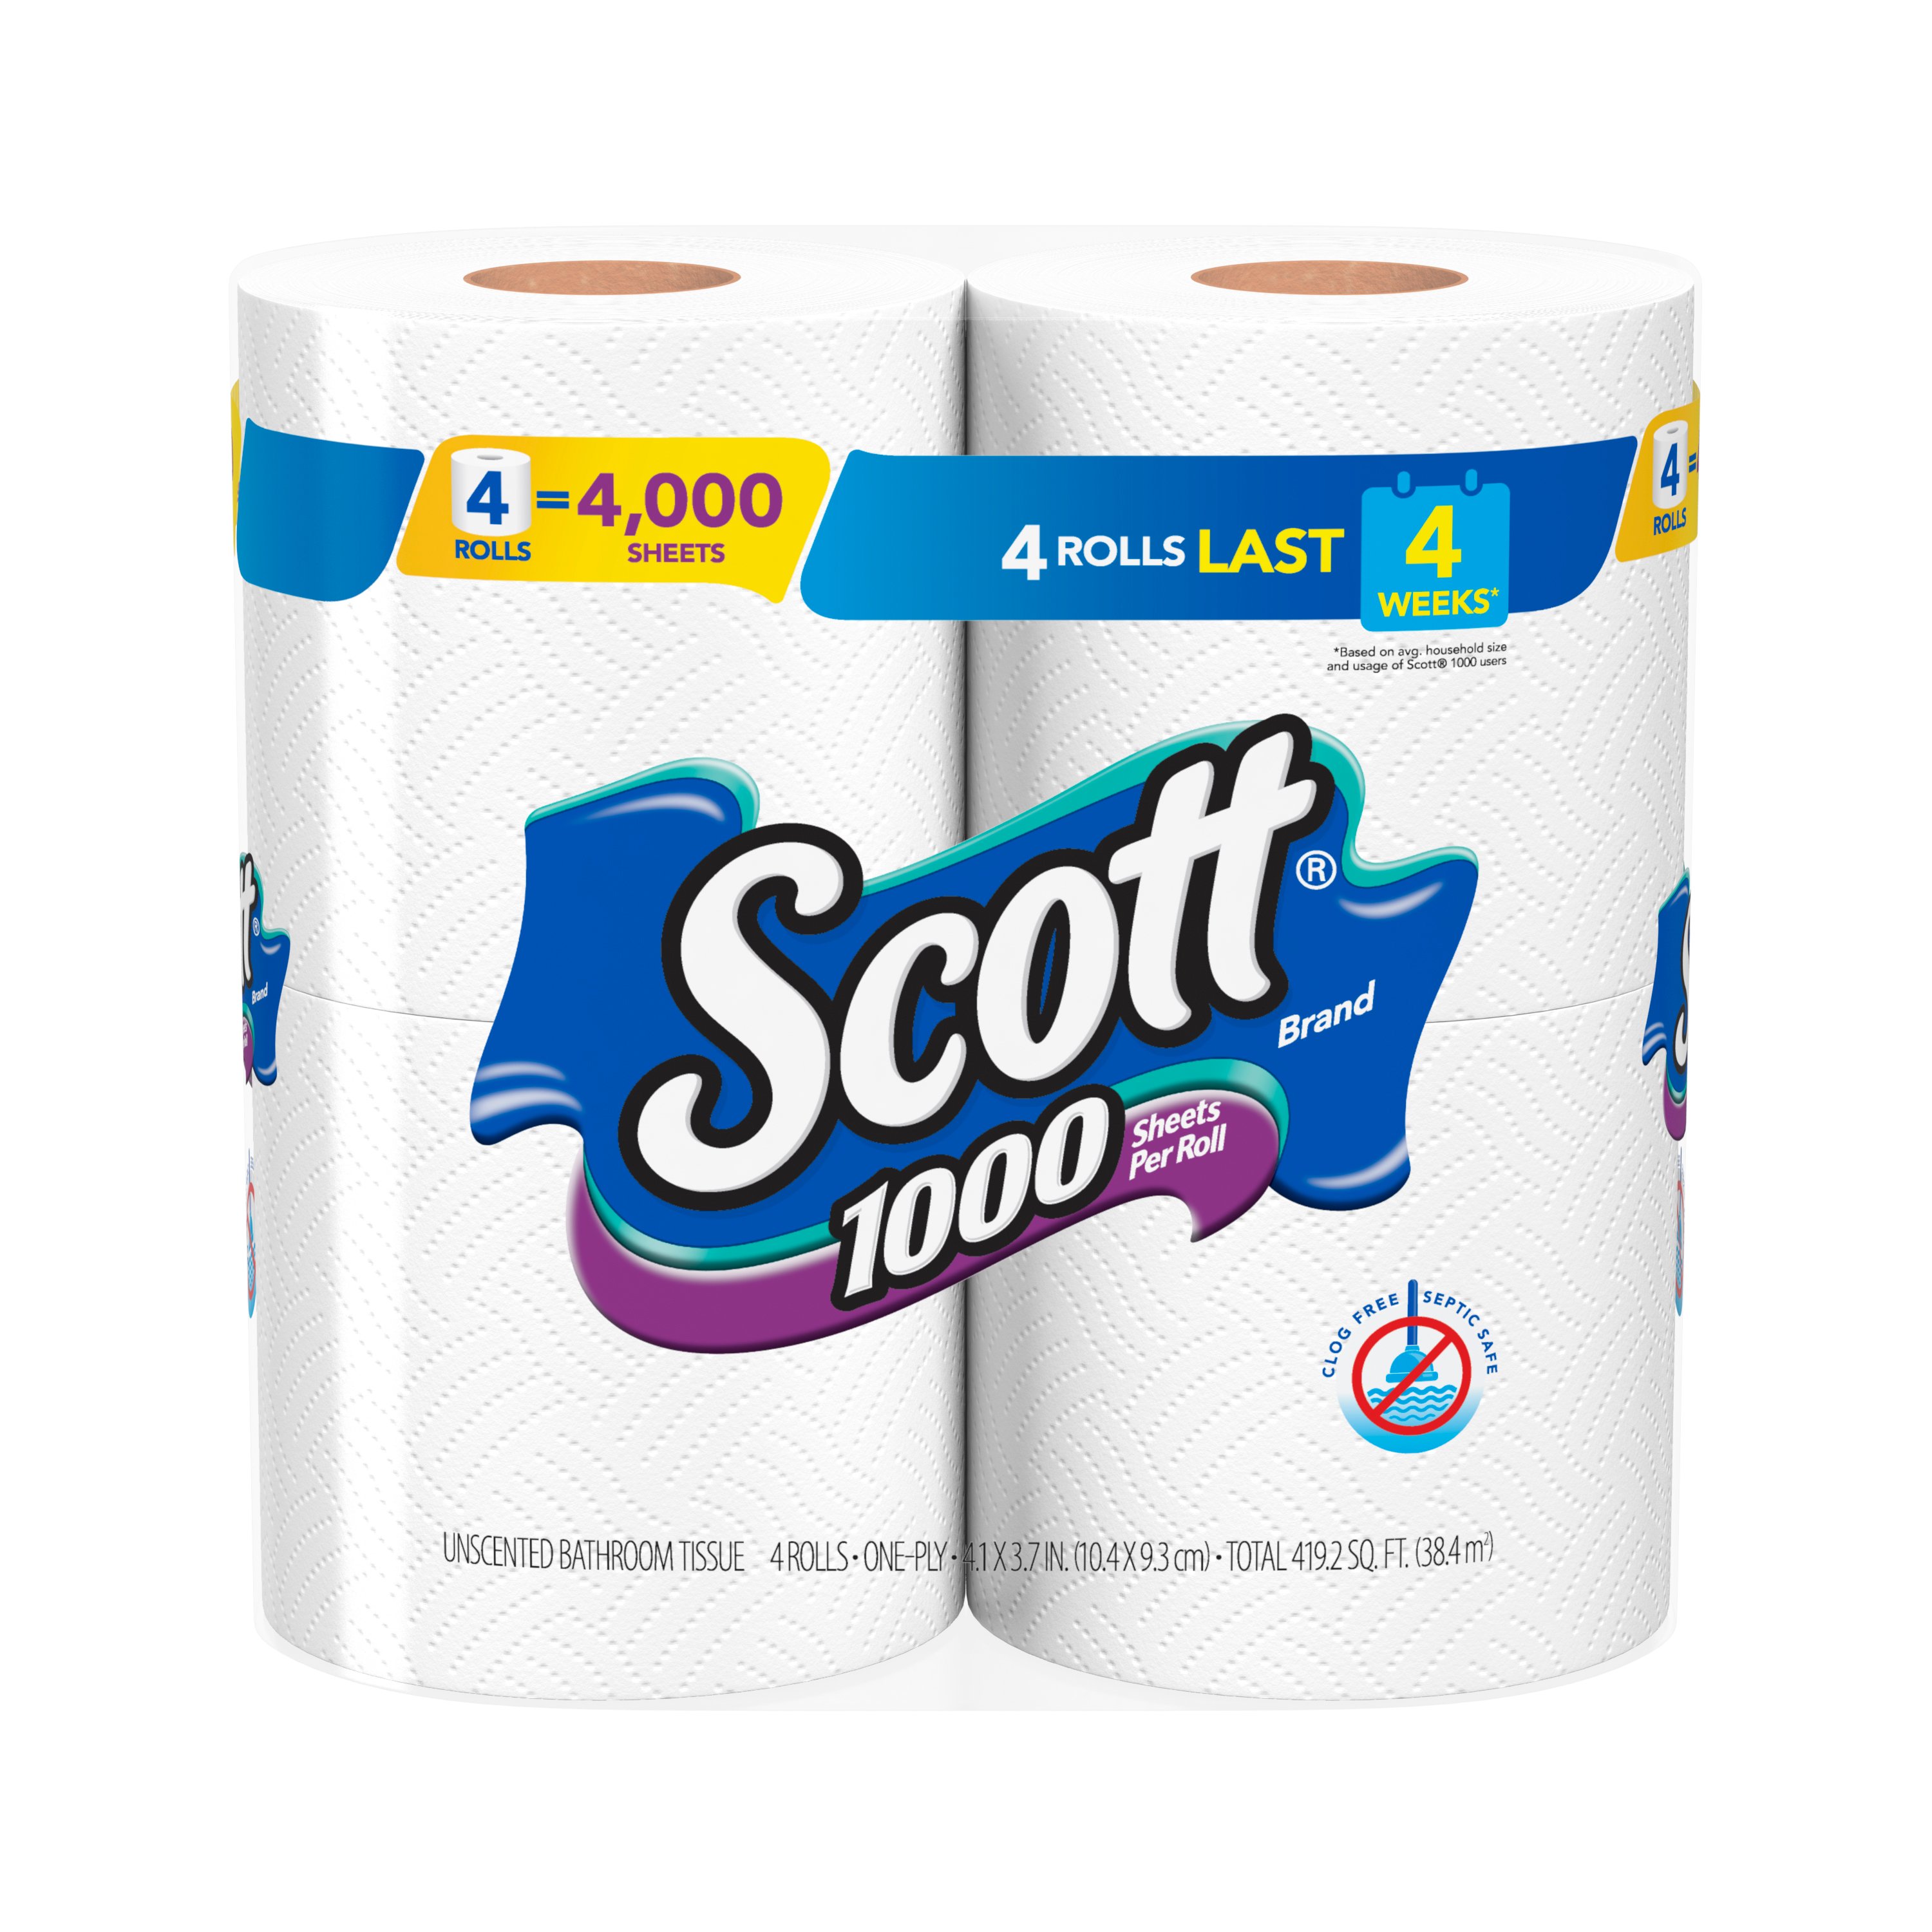 Scott 1000 Trusted Clean Toilet Paper, 32 Rolls, Septic-Safe, 1-Ply Toilet  Tissue, 8 Count (Pack of 4)